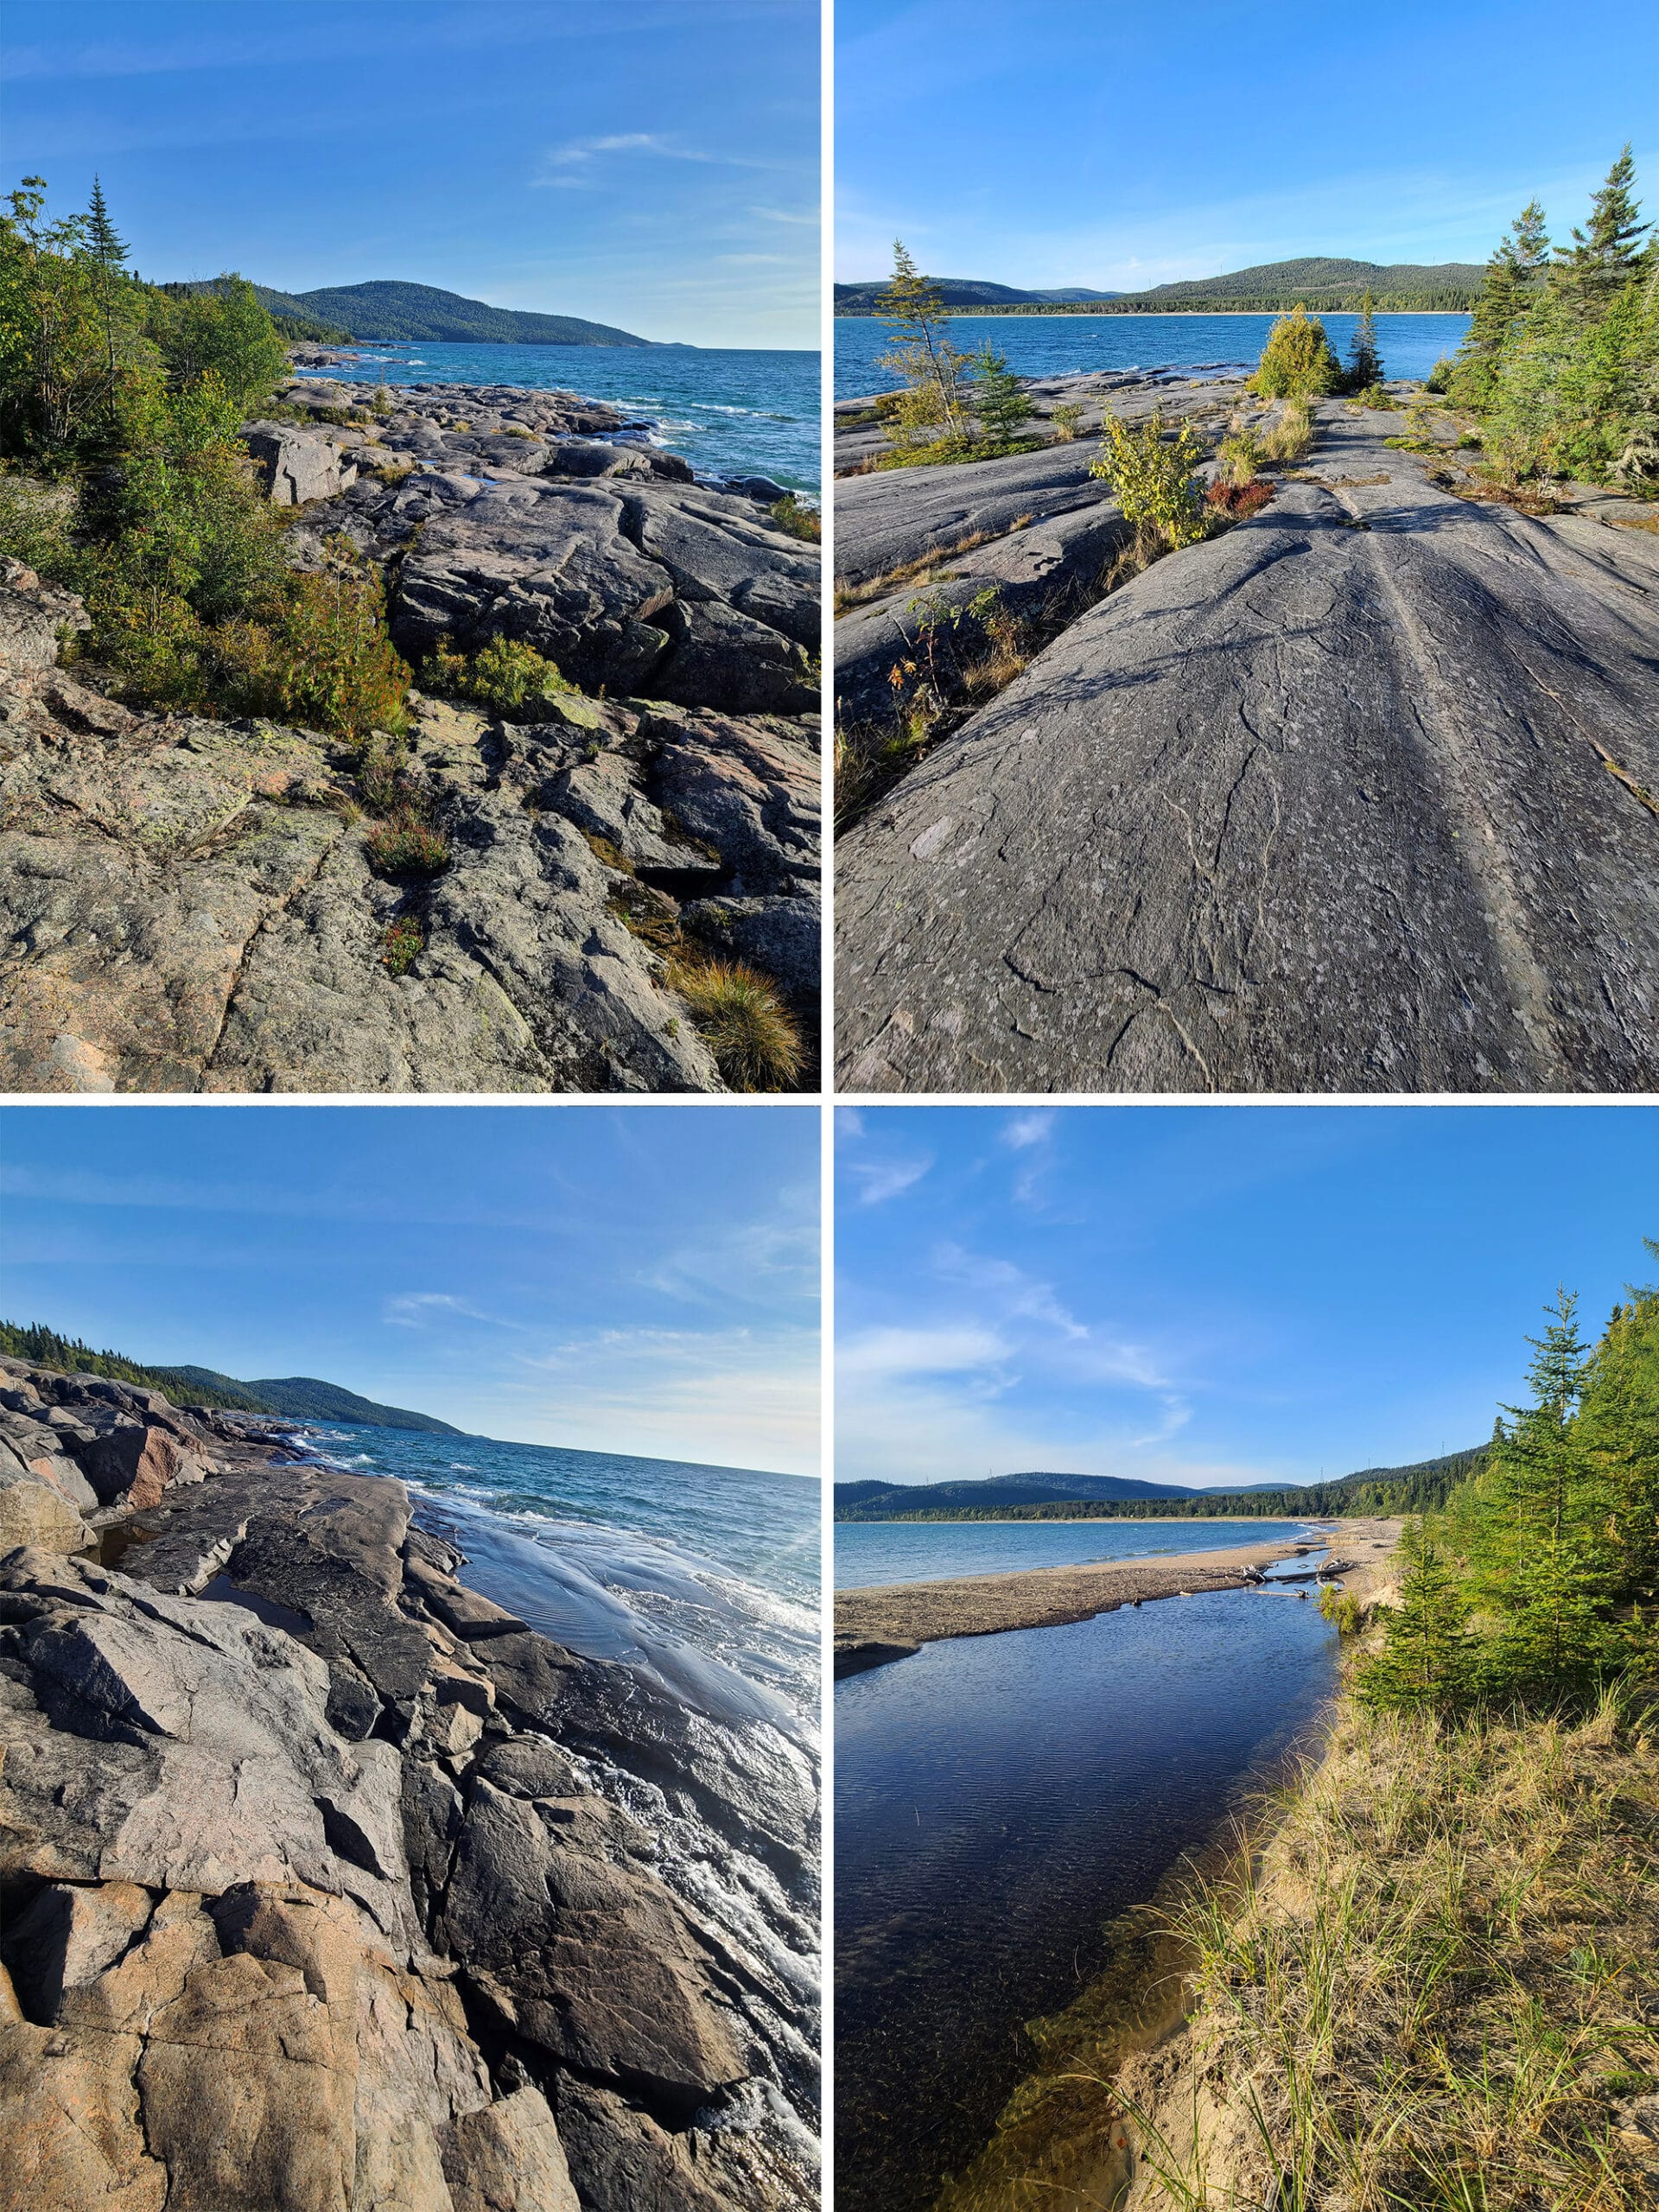 A 4 part image showing different views of large rocks with lake superior in the background.